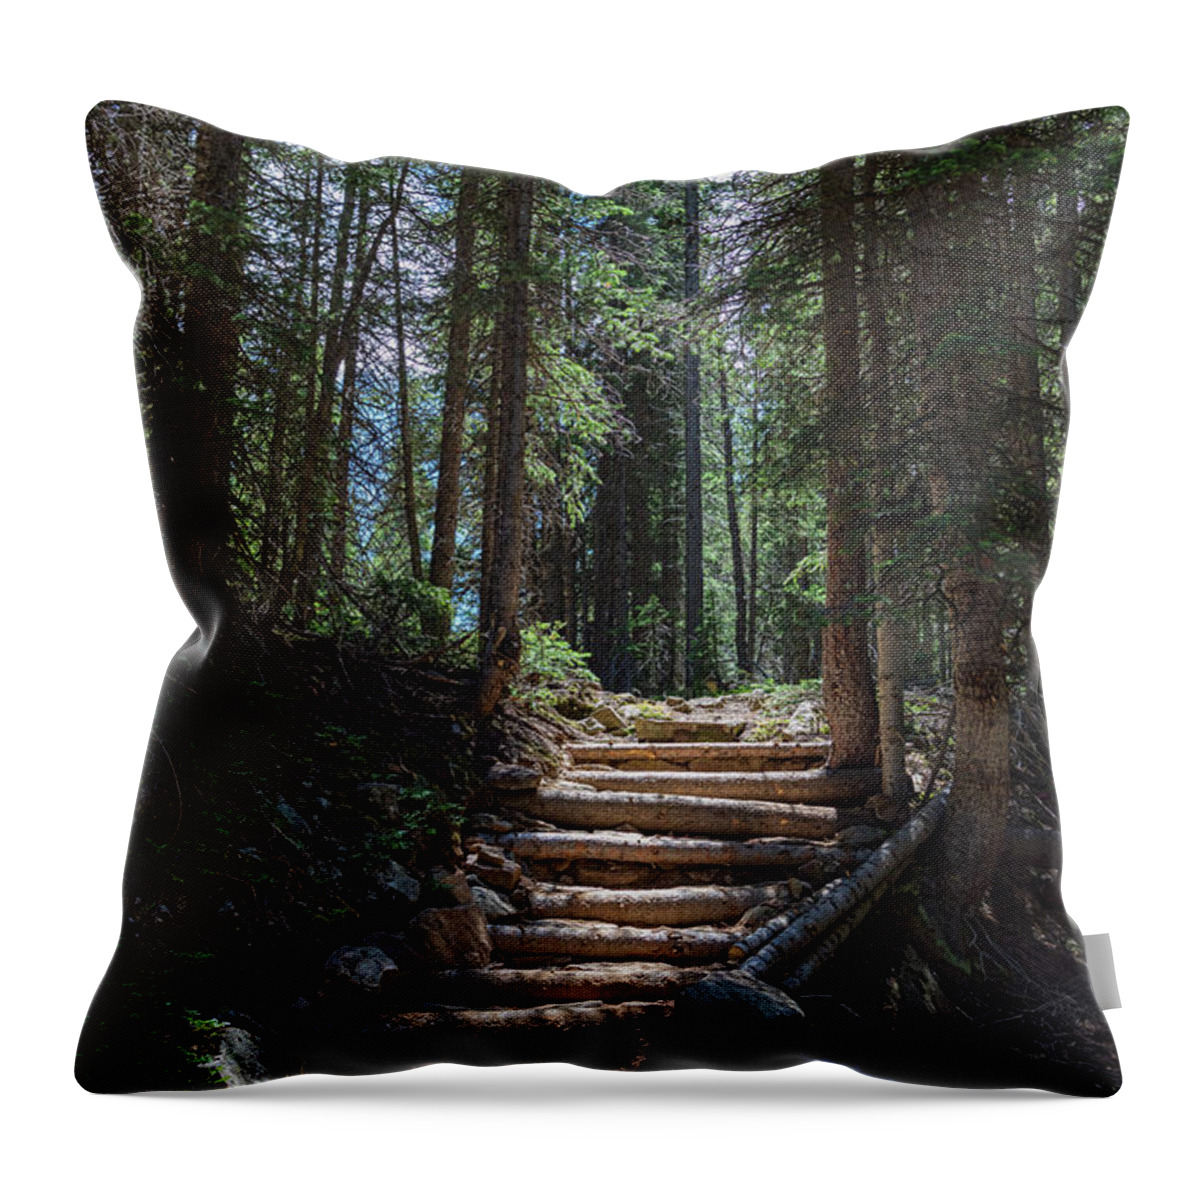 Natural Throw Pillow featuring the photograph Just Another Stairway To Heaven by James BO Insogna